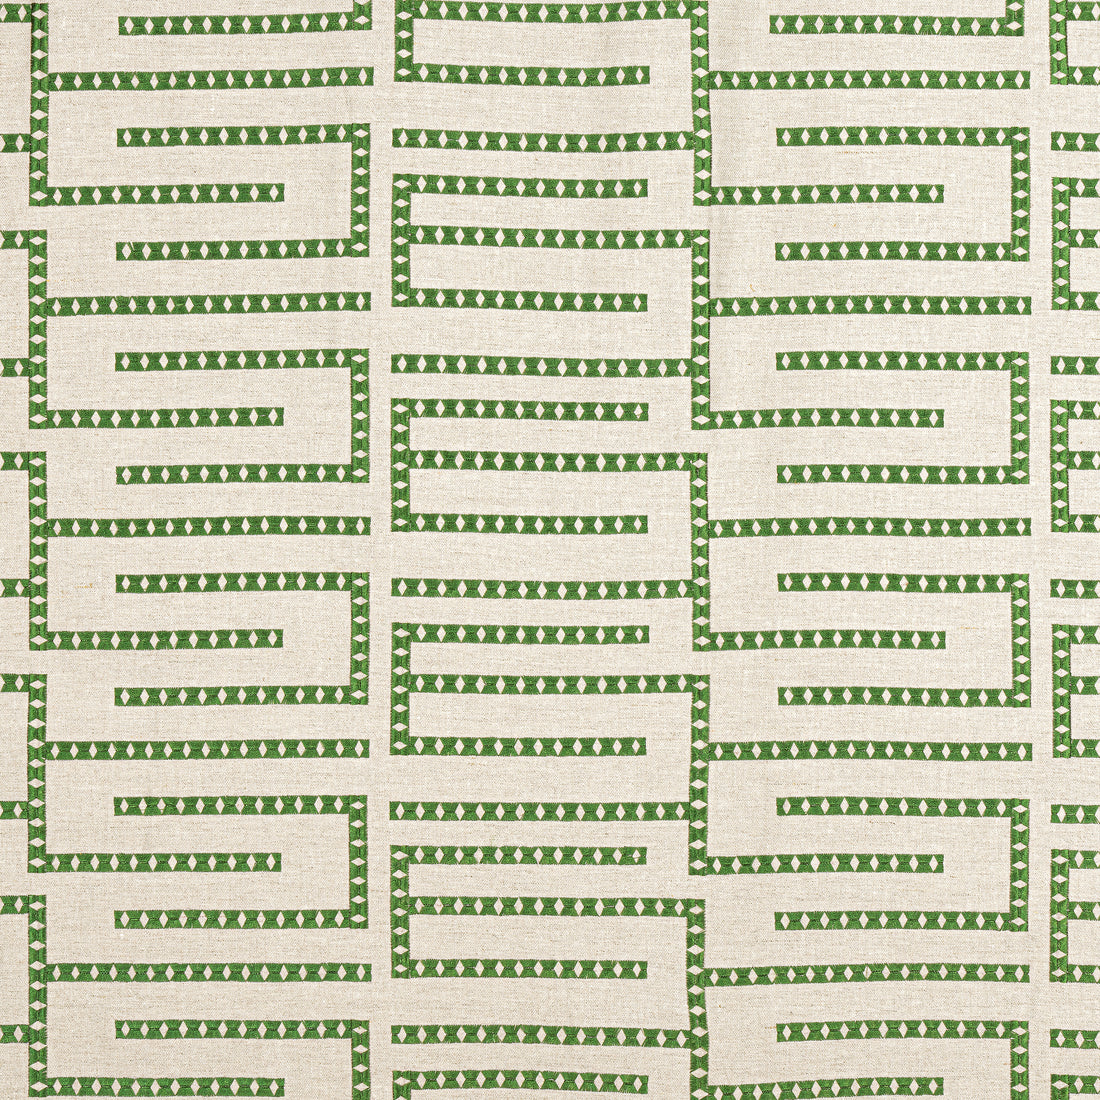 Architect Embroidery fabric in emerald - pattern number W713628 - by Thibaut in the Grand Palace collection